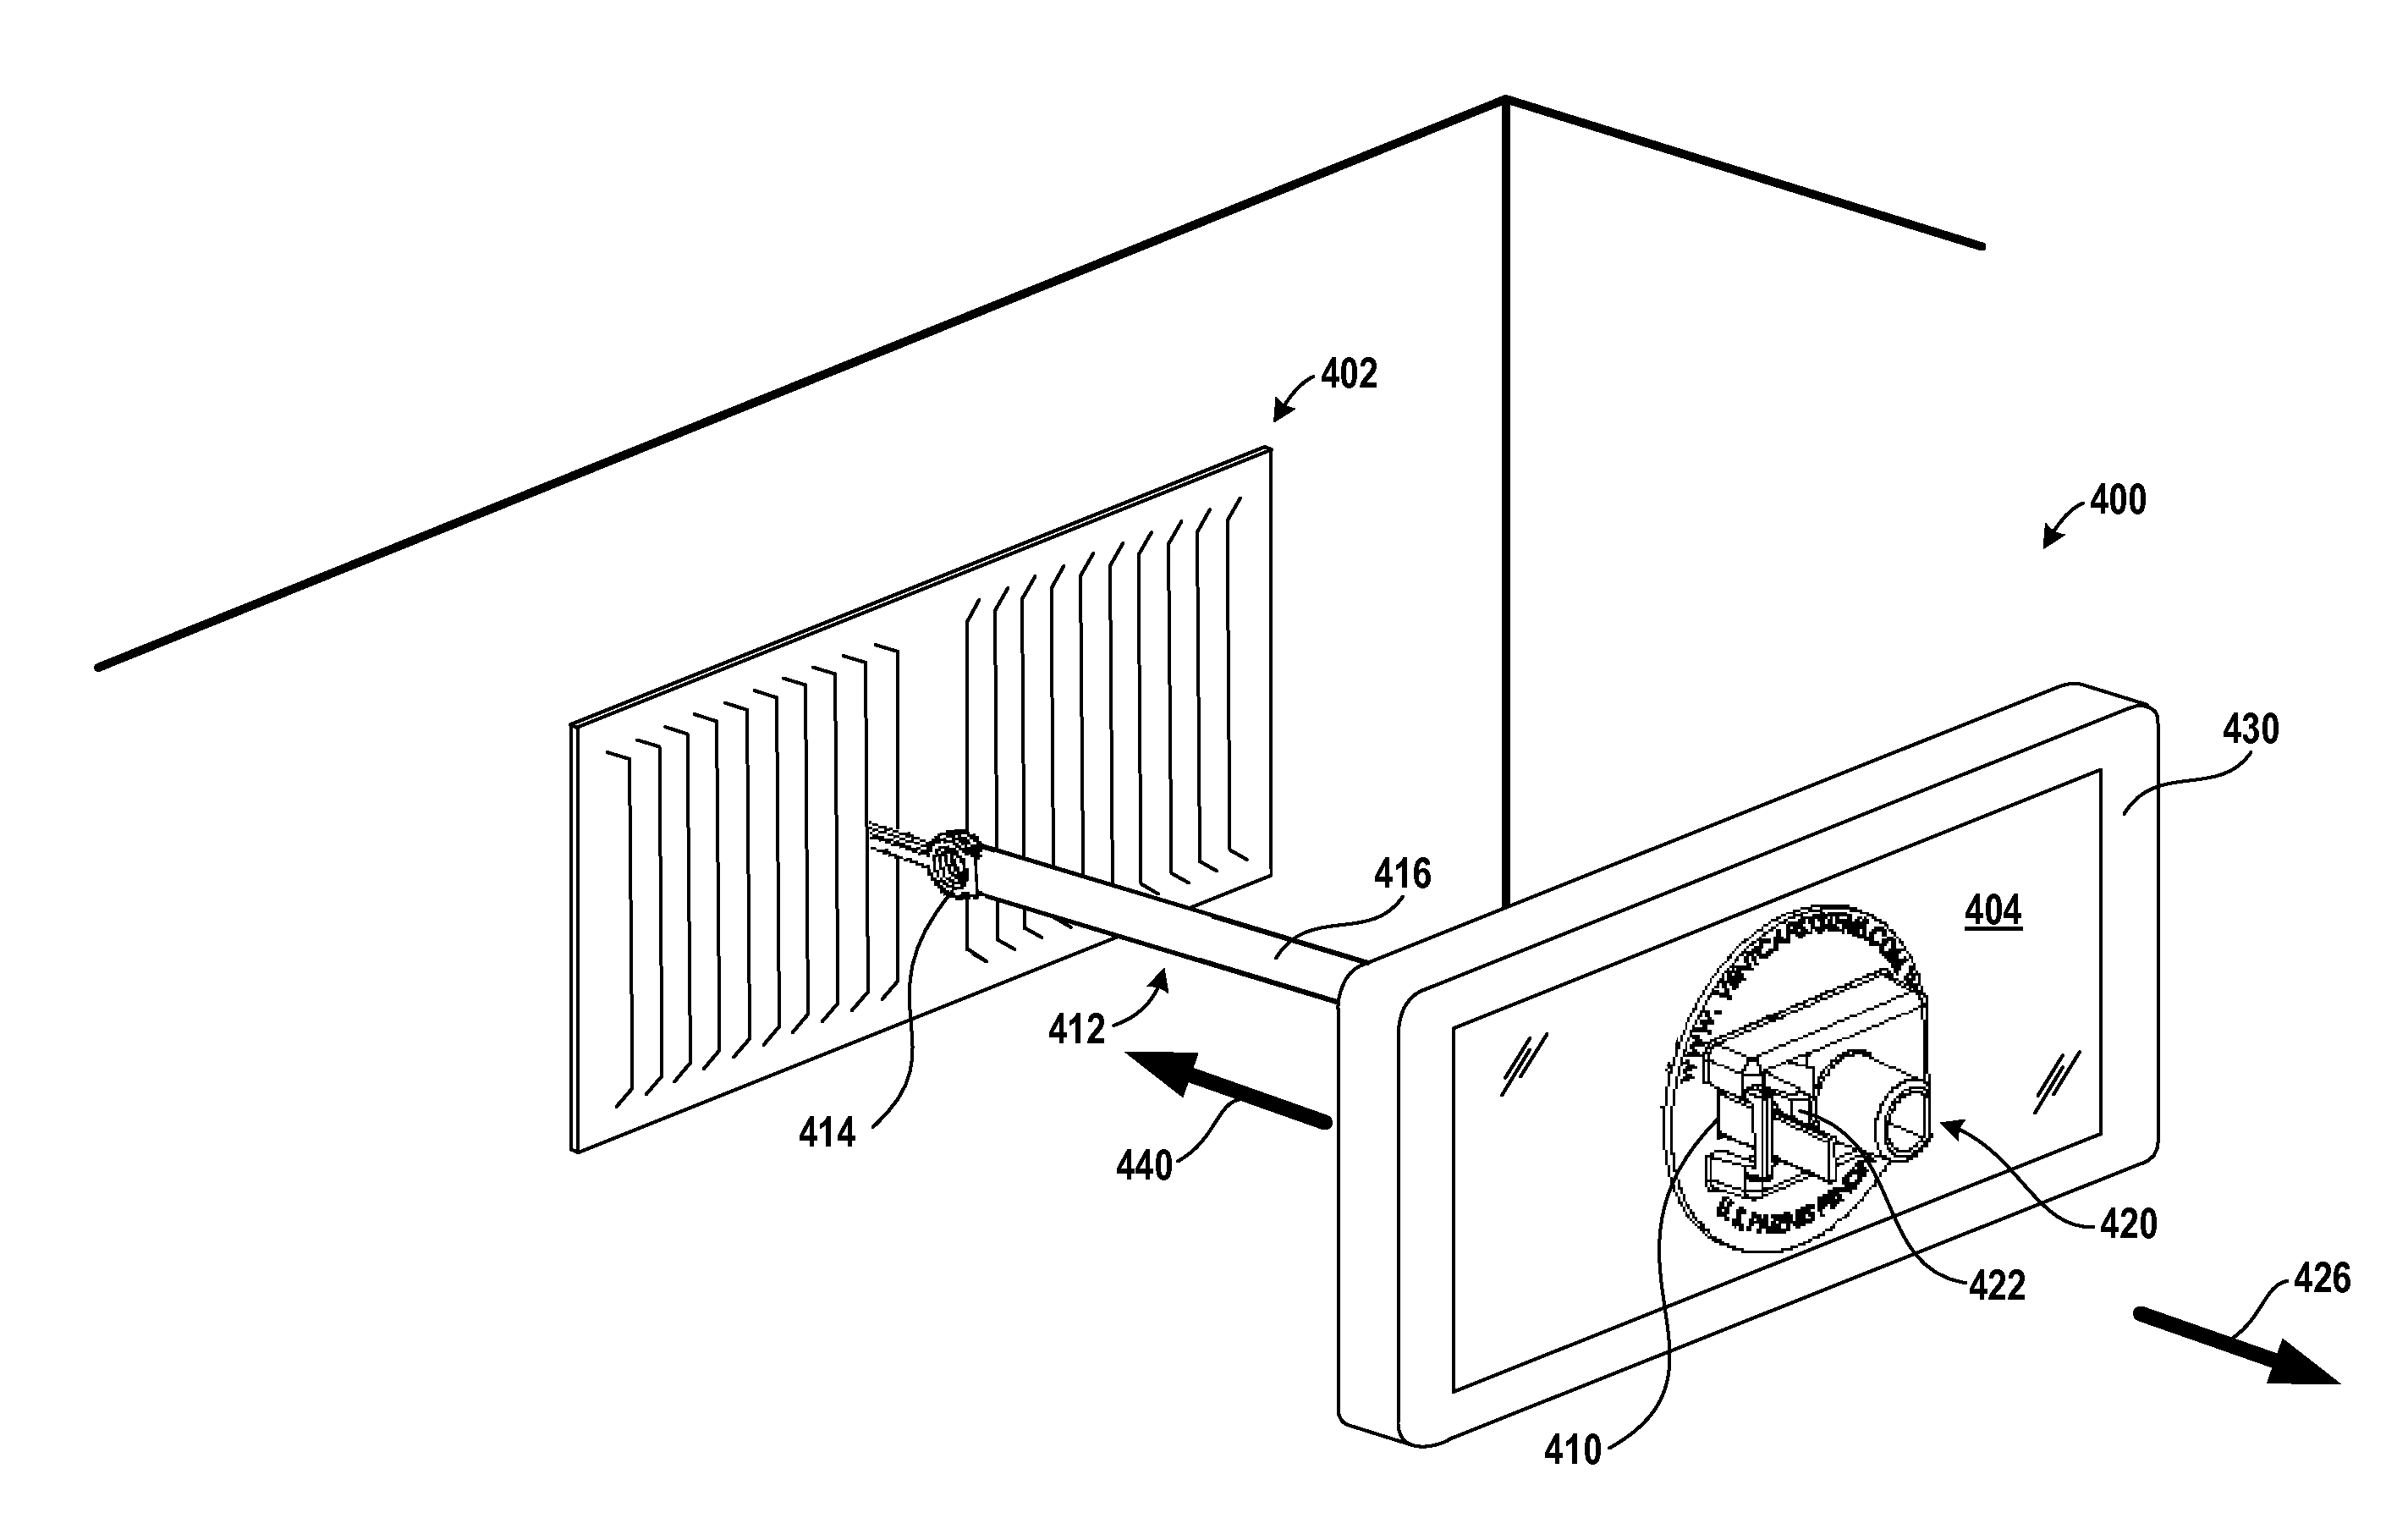 Air duct sealing system for obstructing or directing airflow through portions of an air duct system